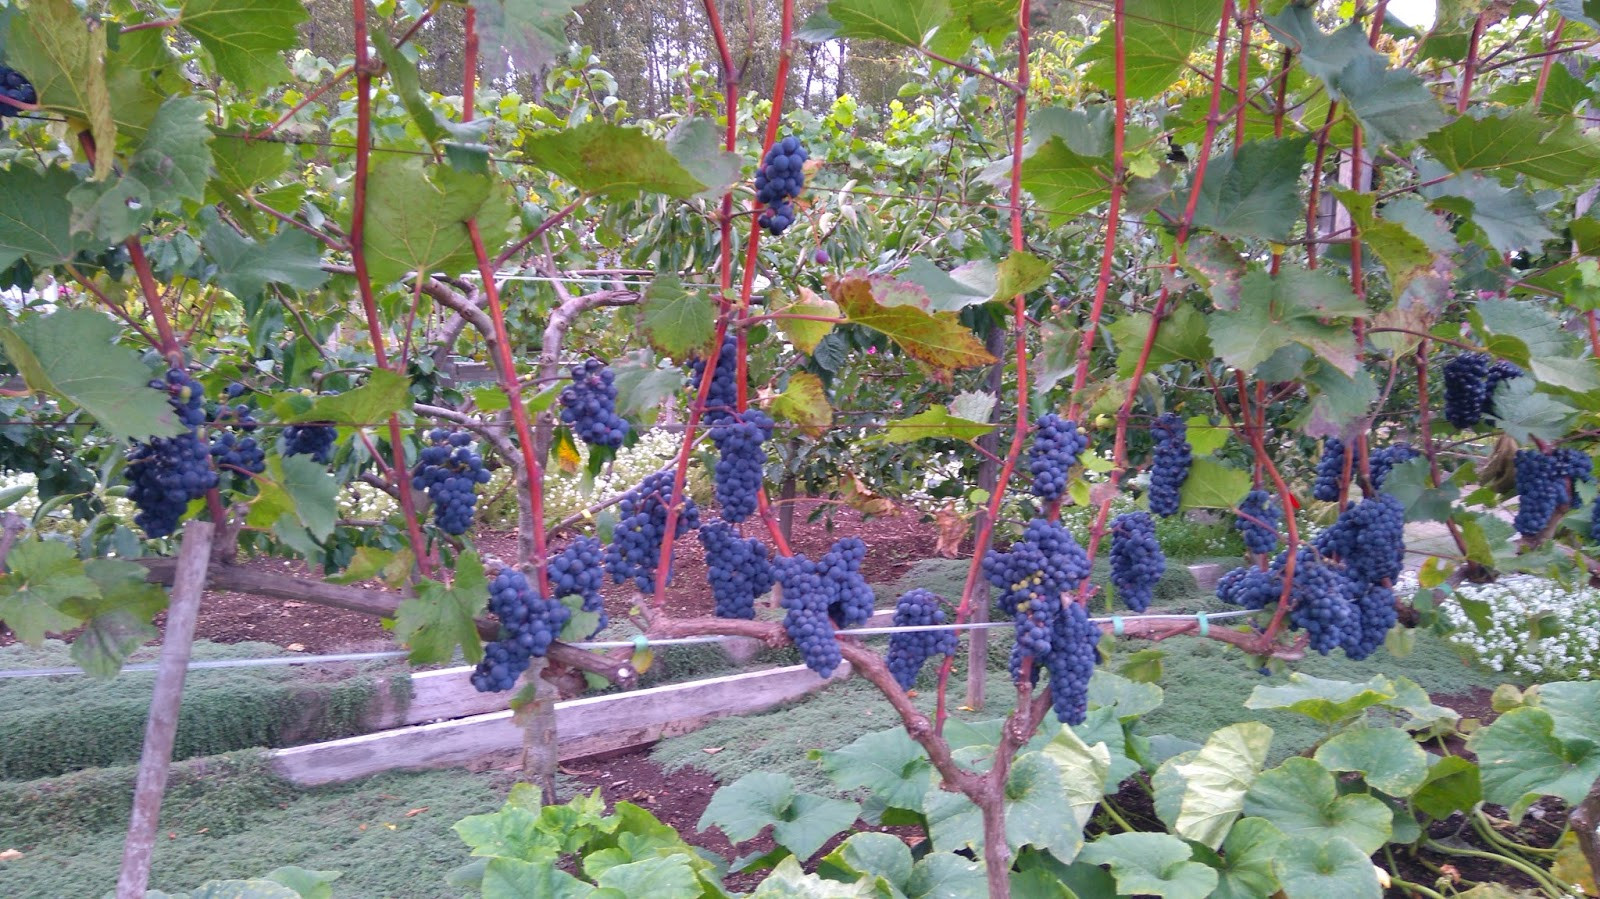 Growing Grapes In Backyard
 motherkerala How to grow grapes in your backyard